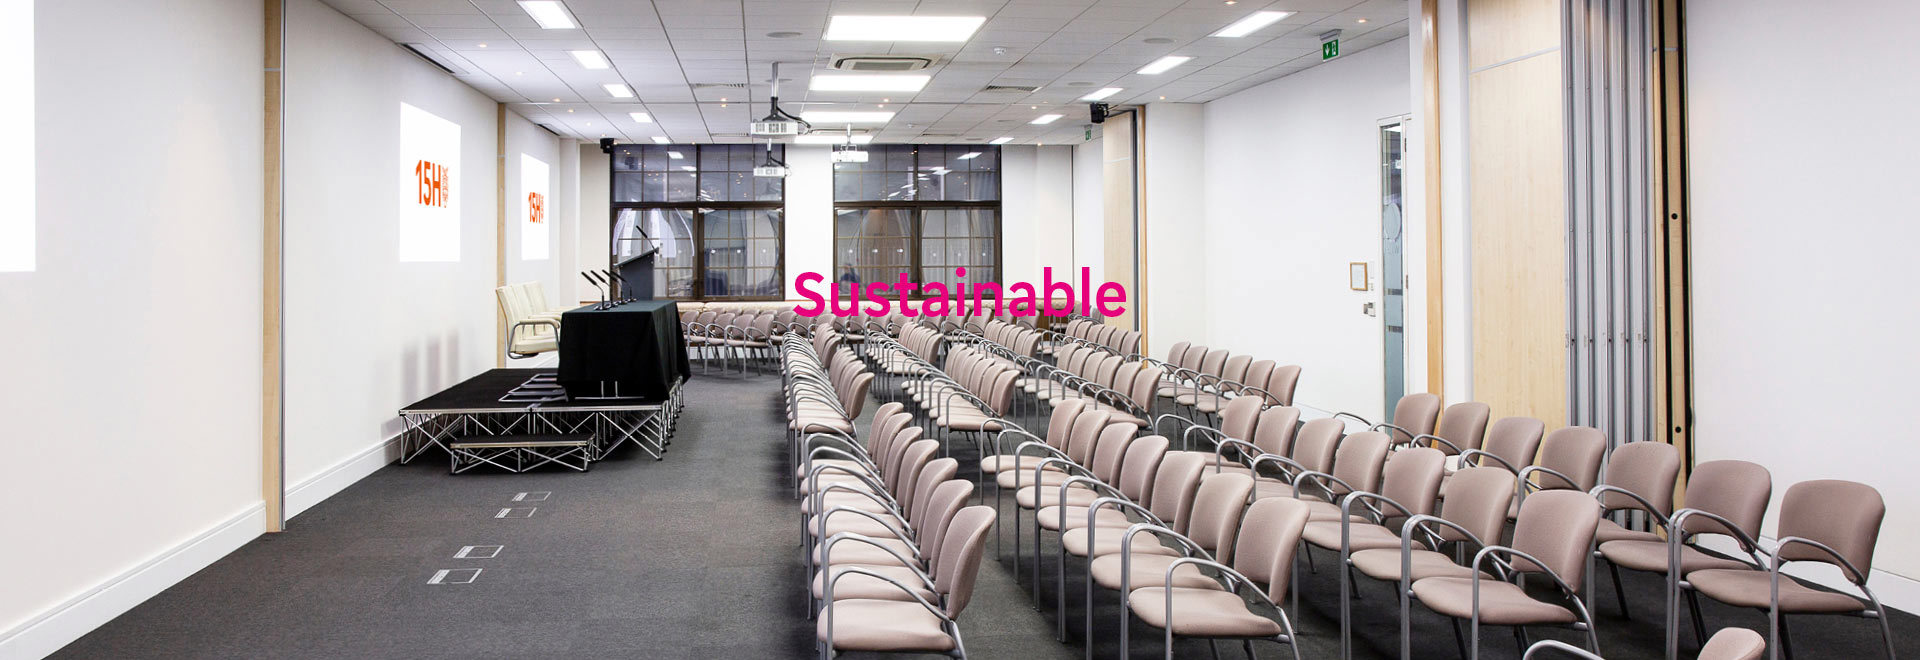 15Hatfields conference room with the word 'Sustainable'